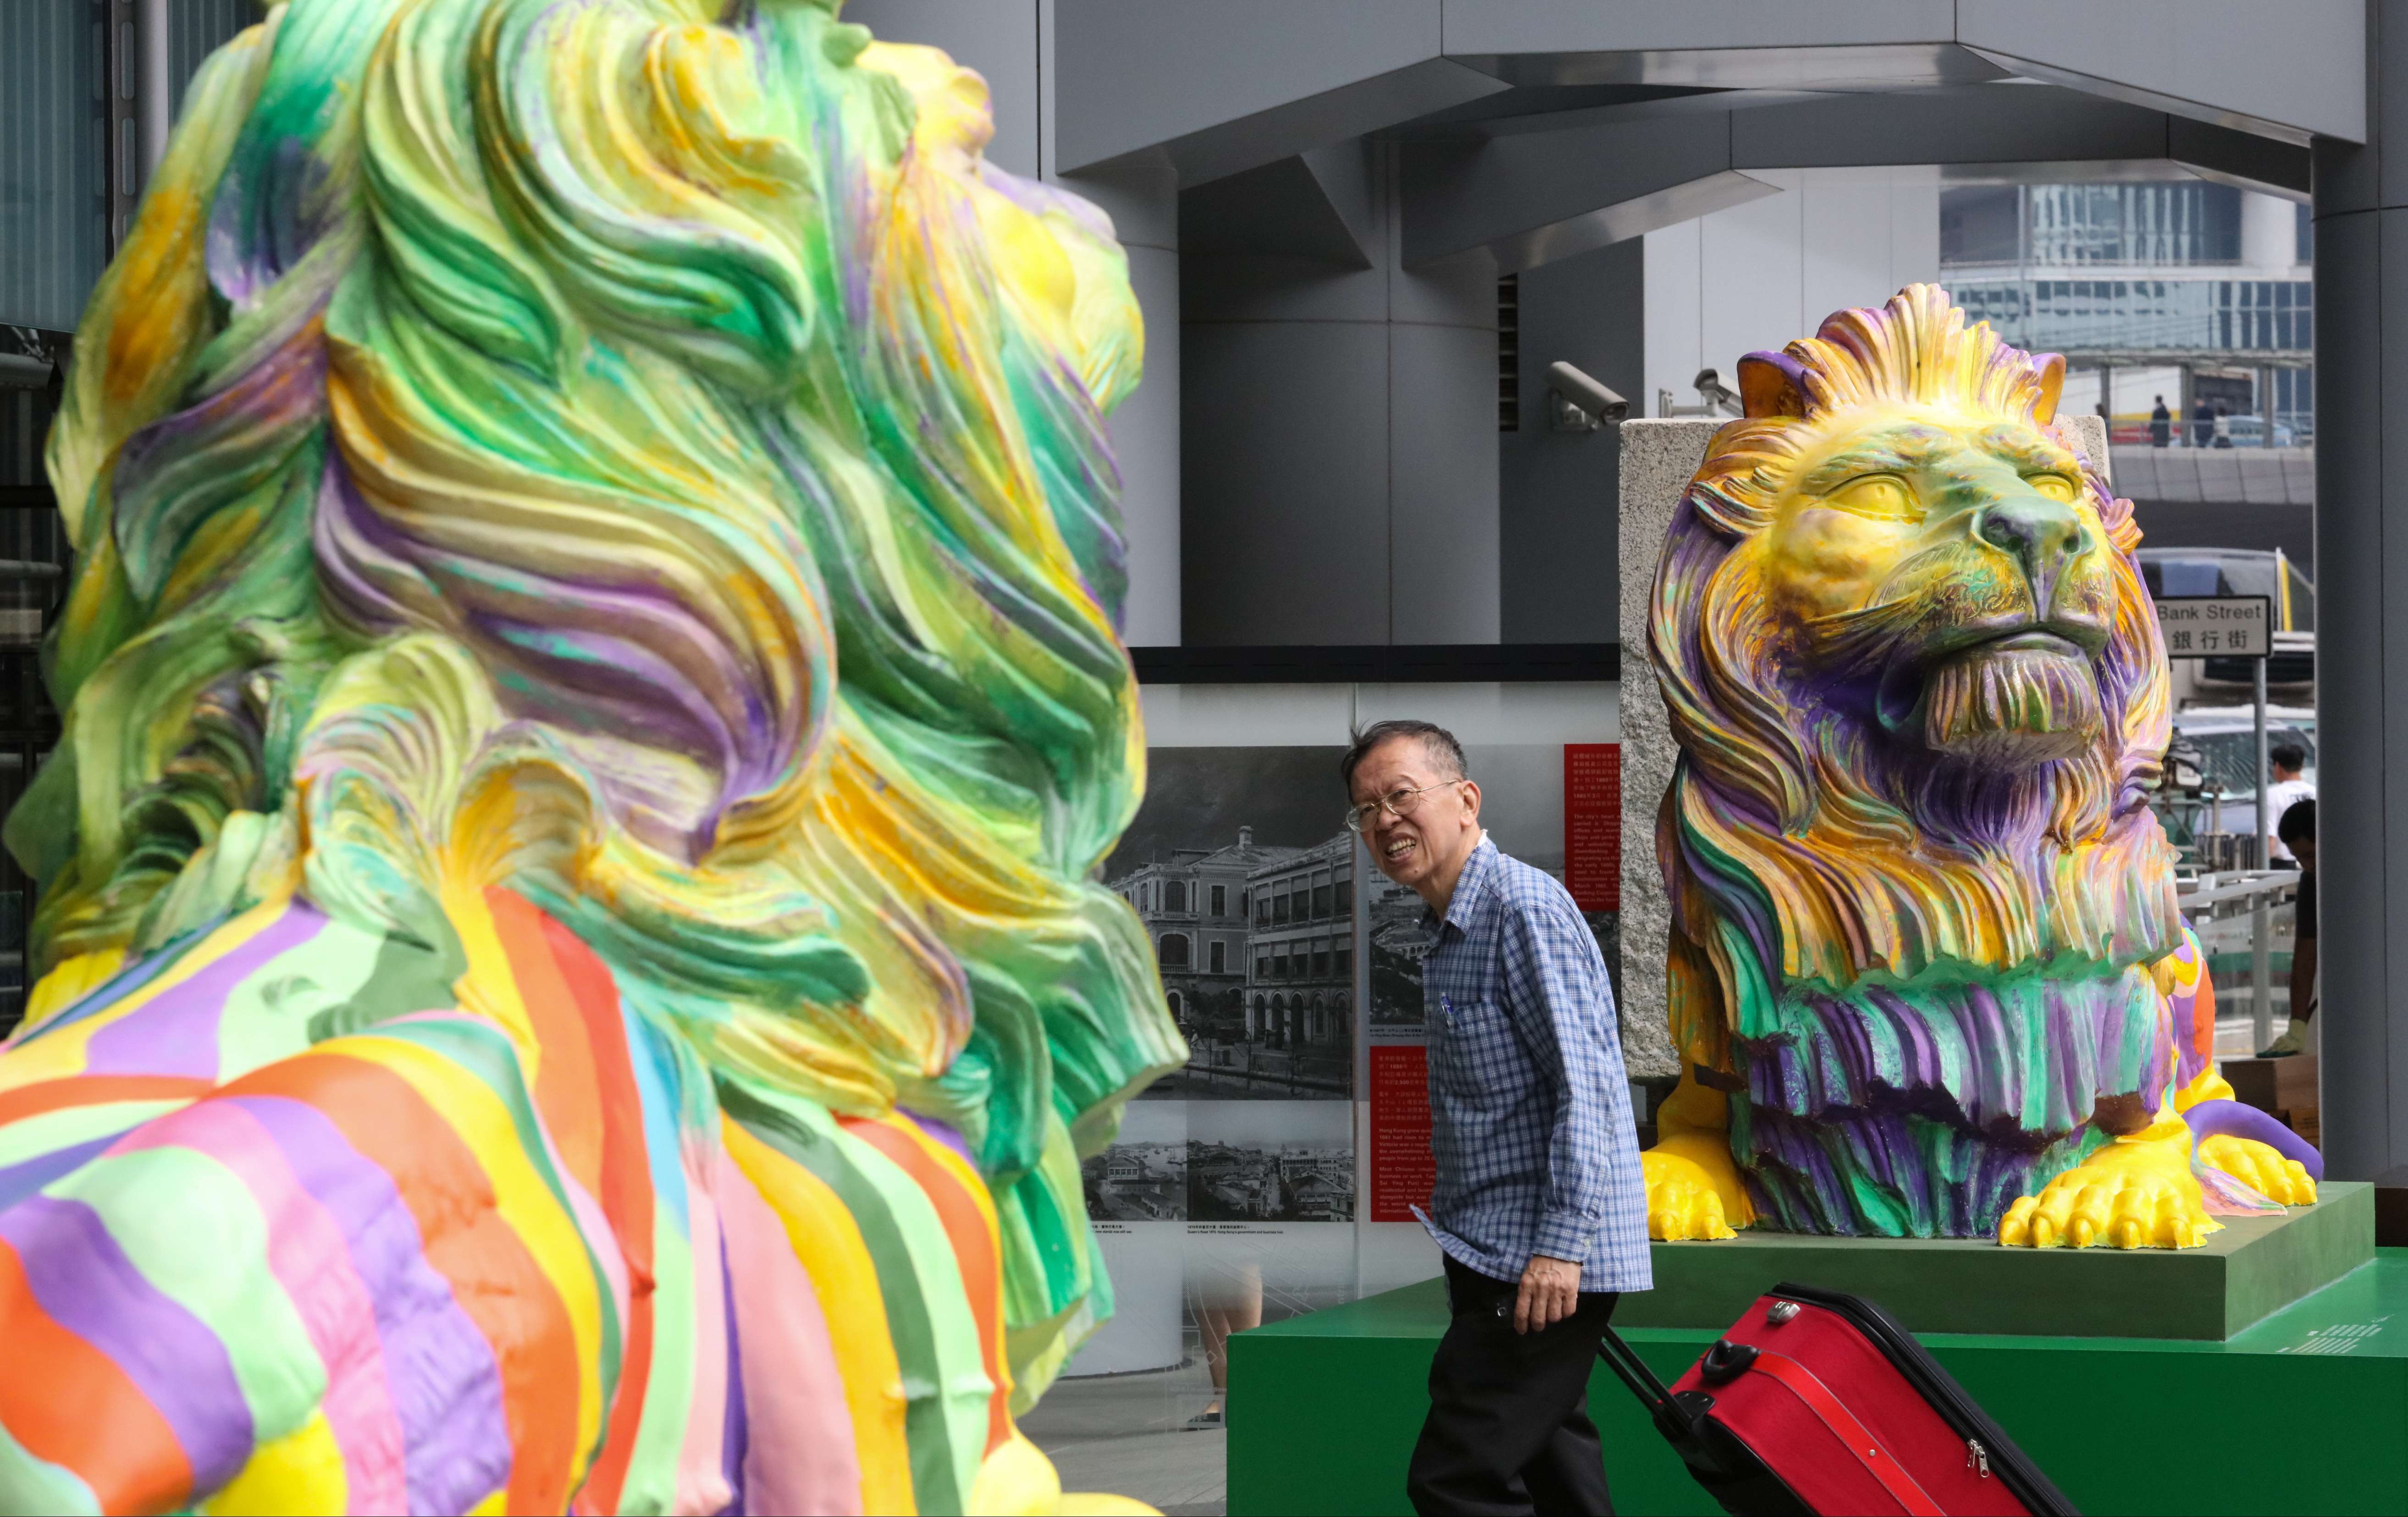 The rainbow-coloured lions outside HSBC headquarters in Central, created by LGBT artist Michael Lam, represent pride and unity in diversity. Photo: Felix Wong